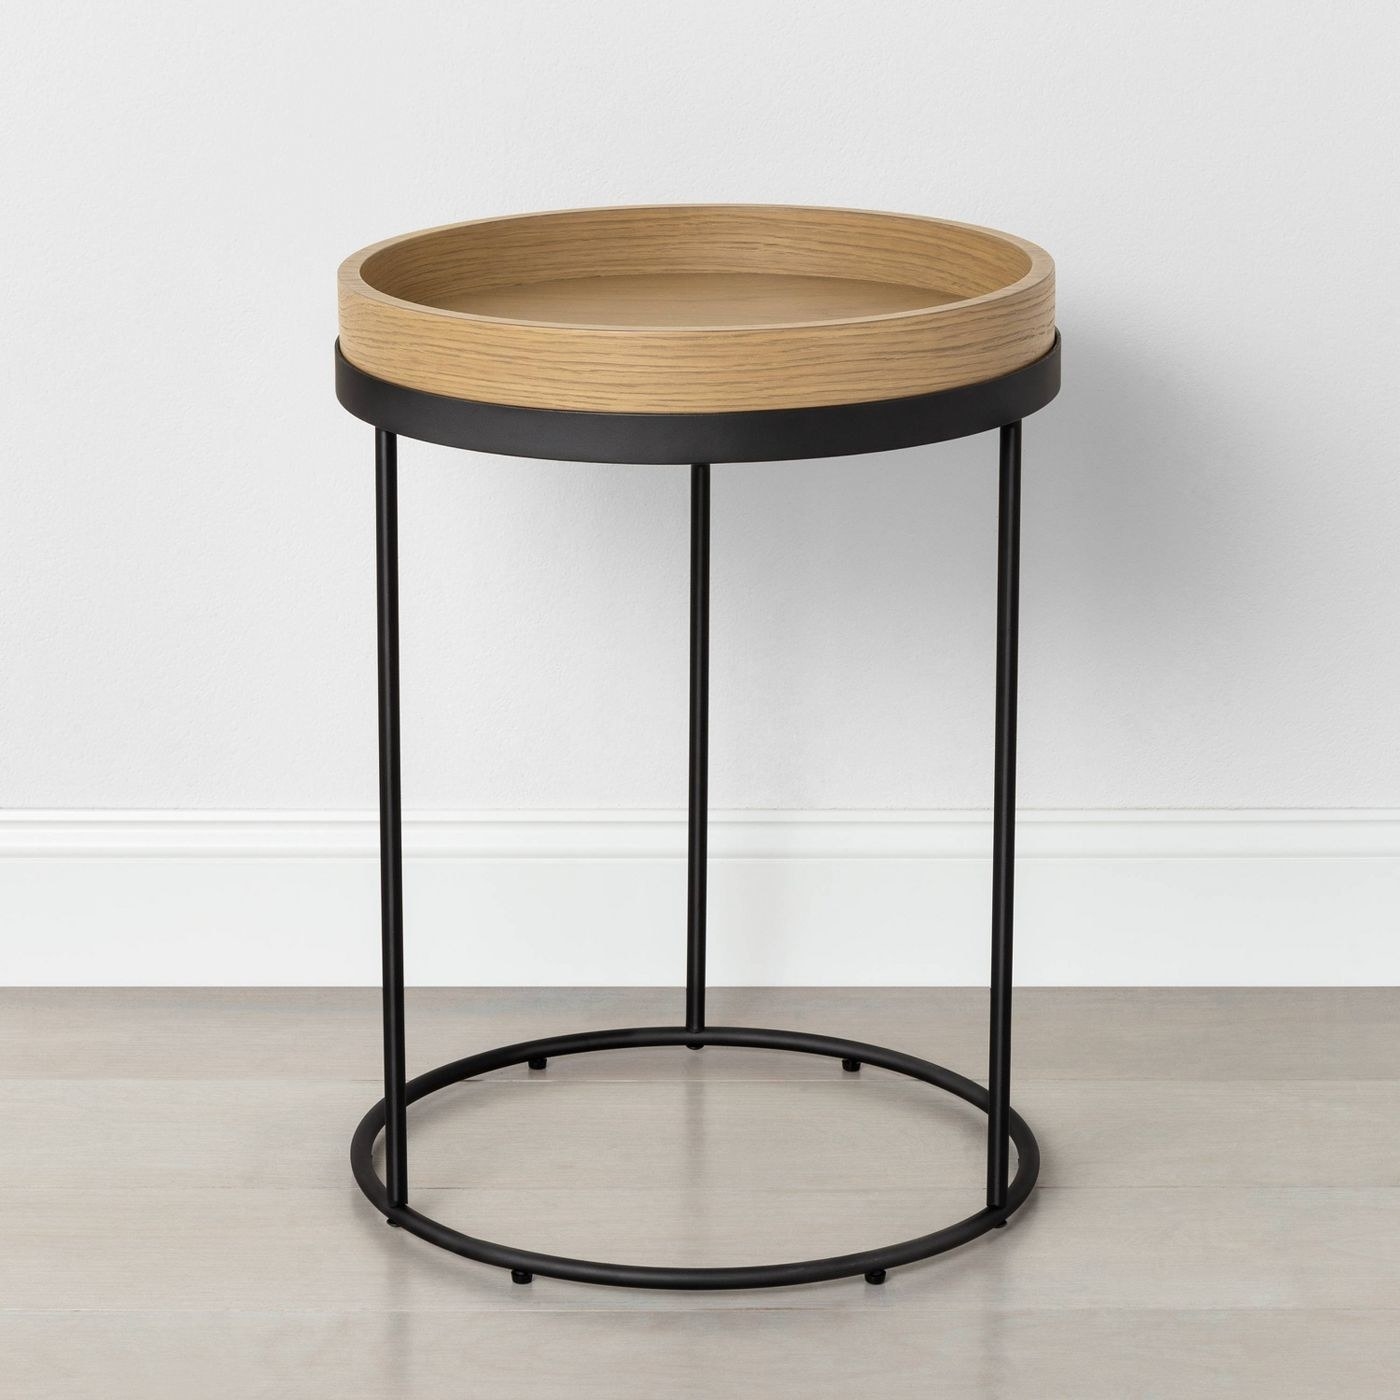 End table with light wood circular top and black metal frame